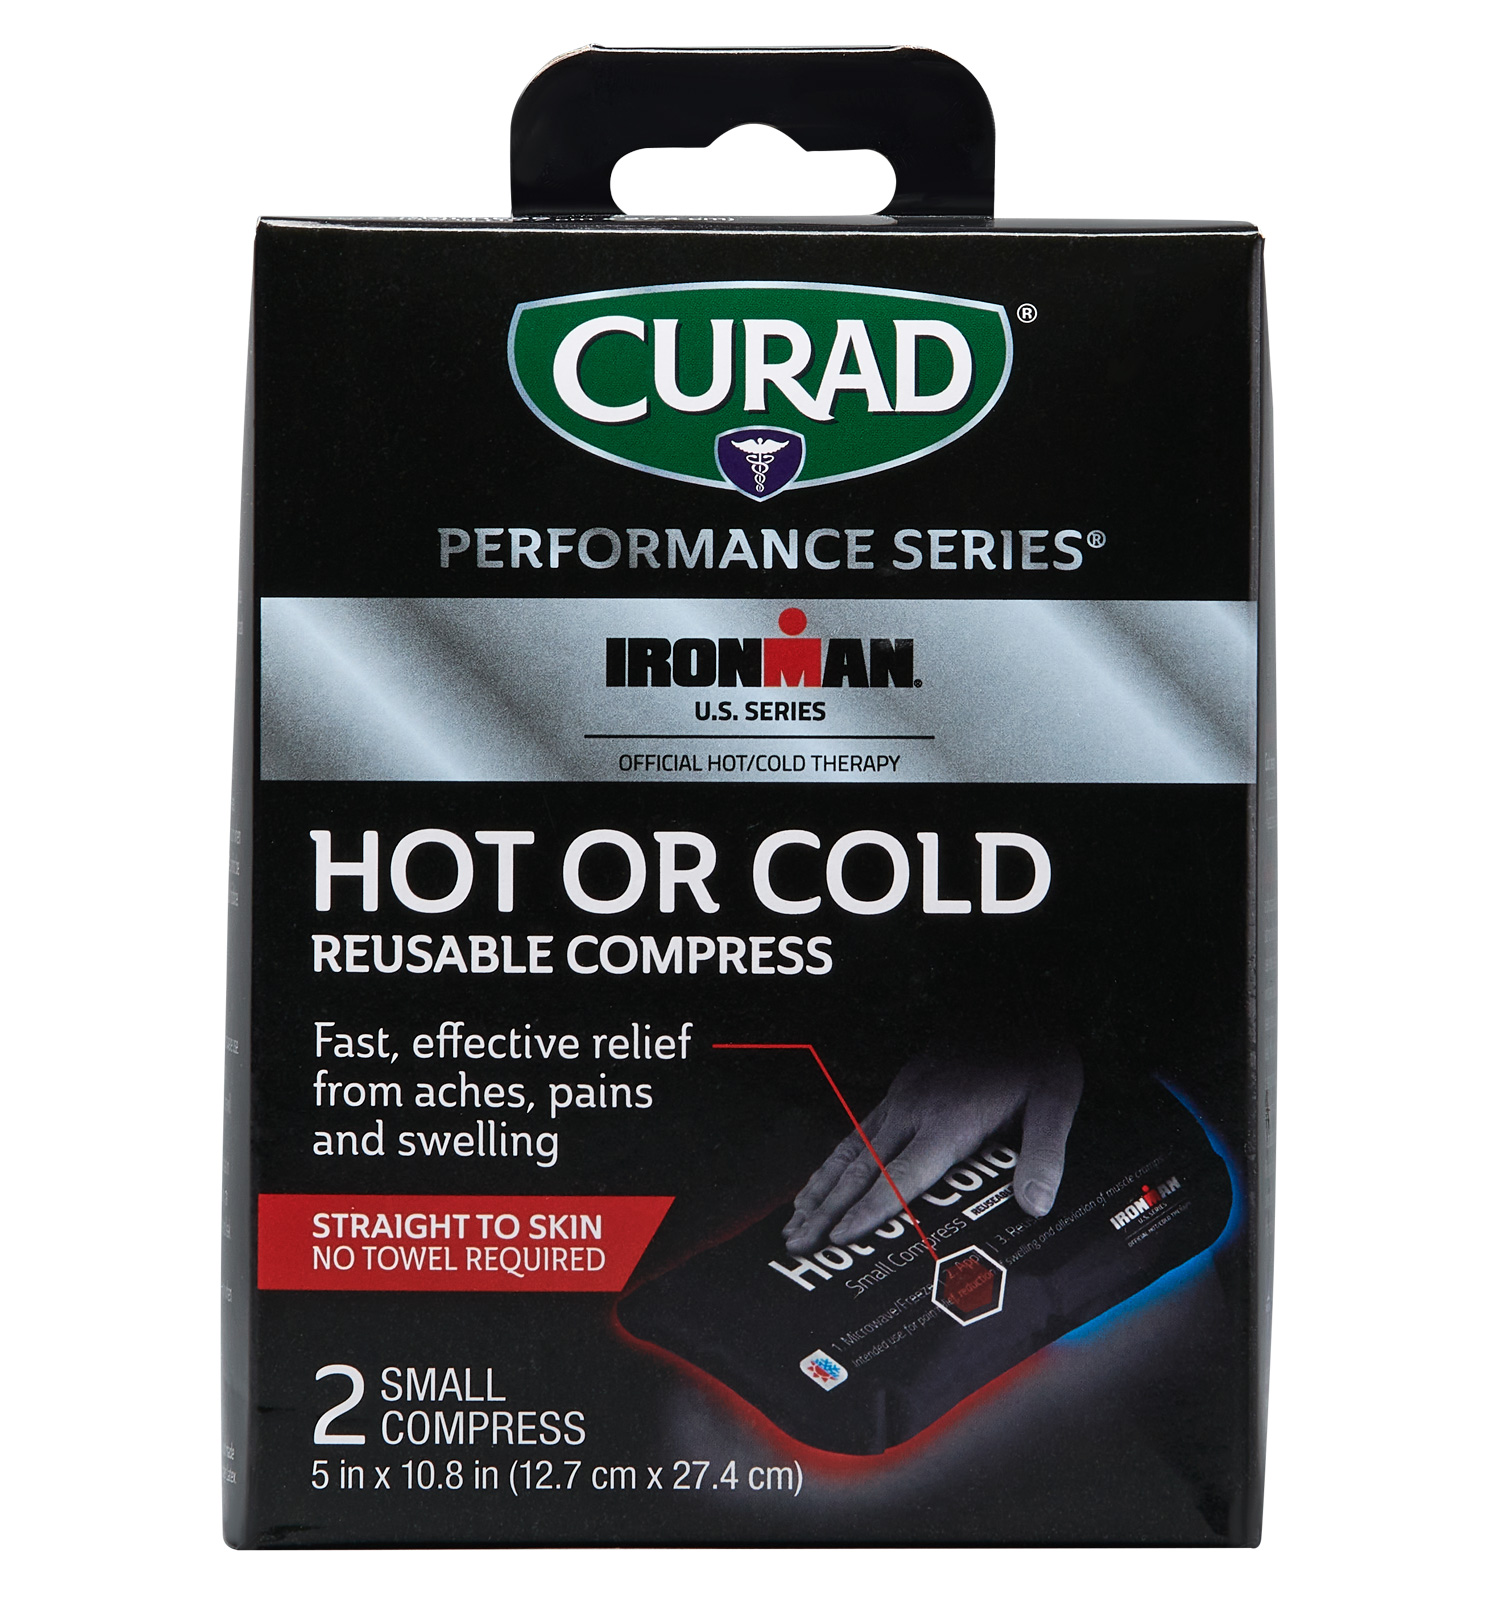 CURAD Performance Series IRONMAN Hot & Cold Reusable Compress, Small, 2  count